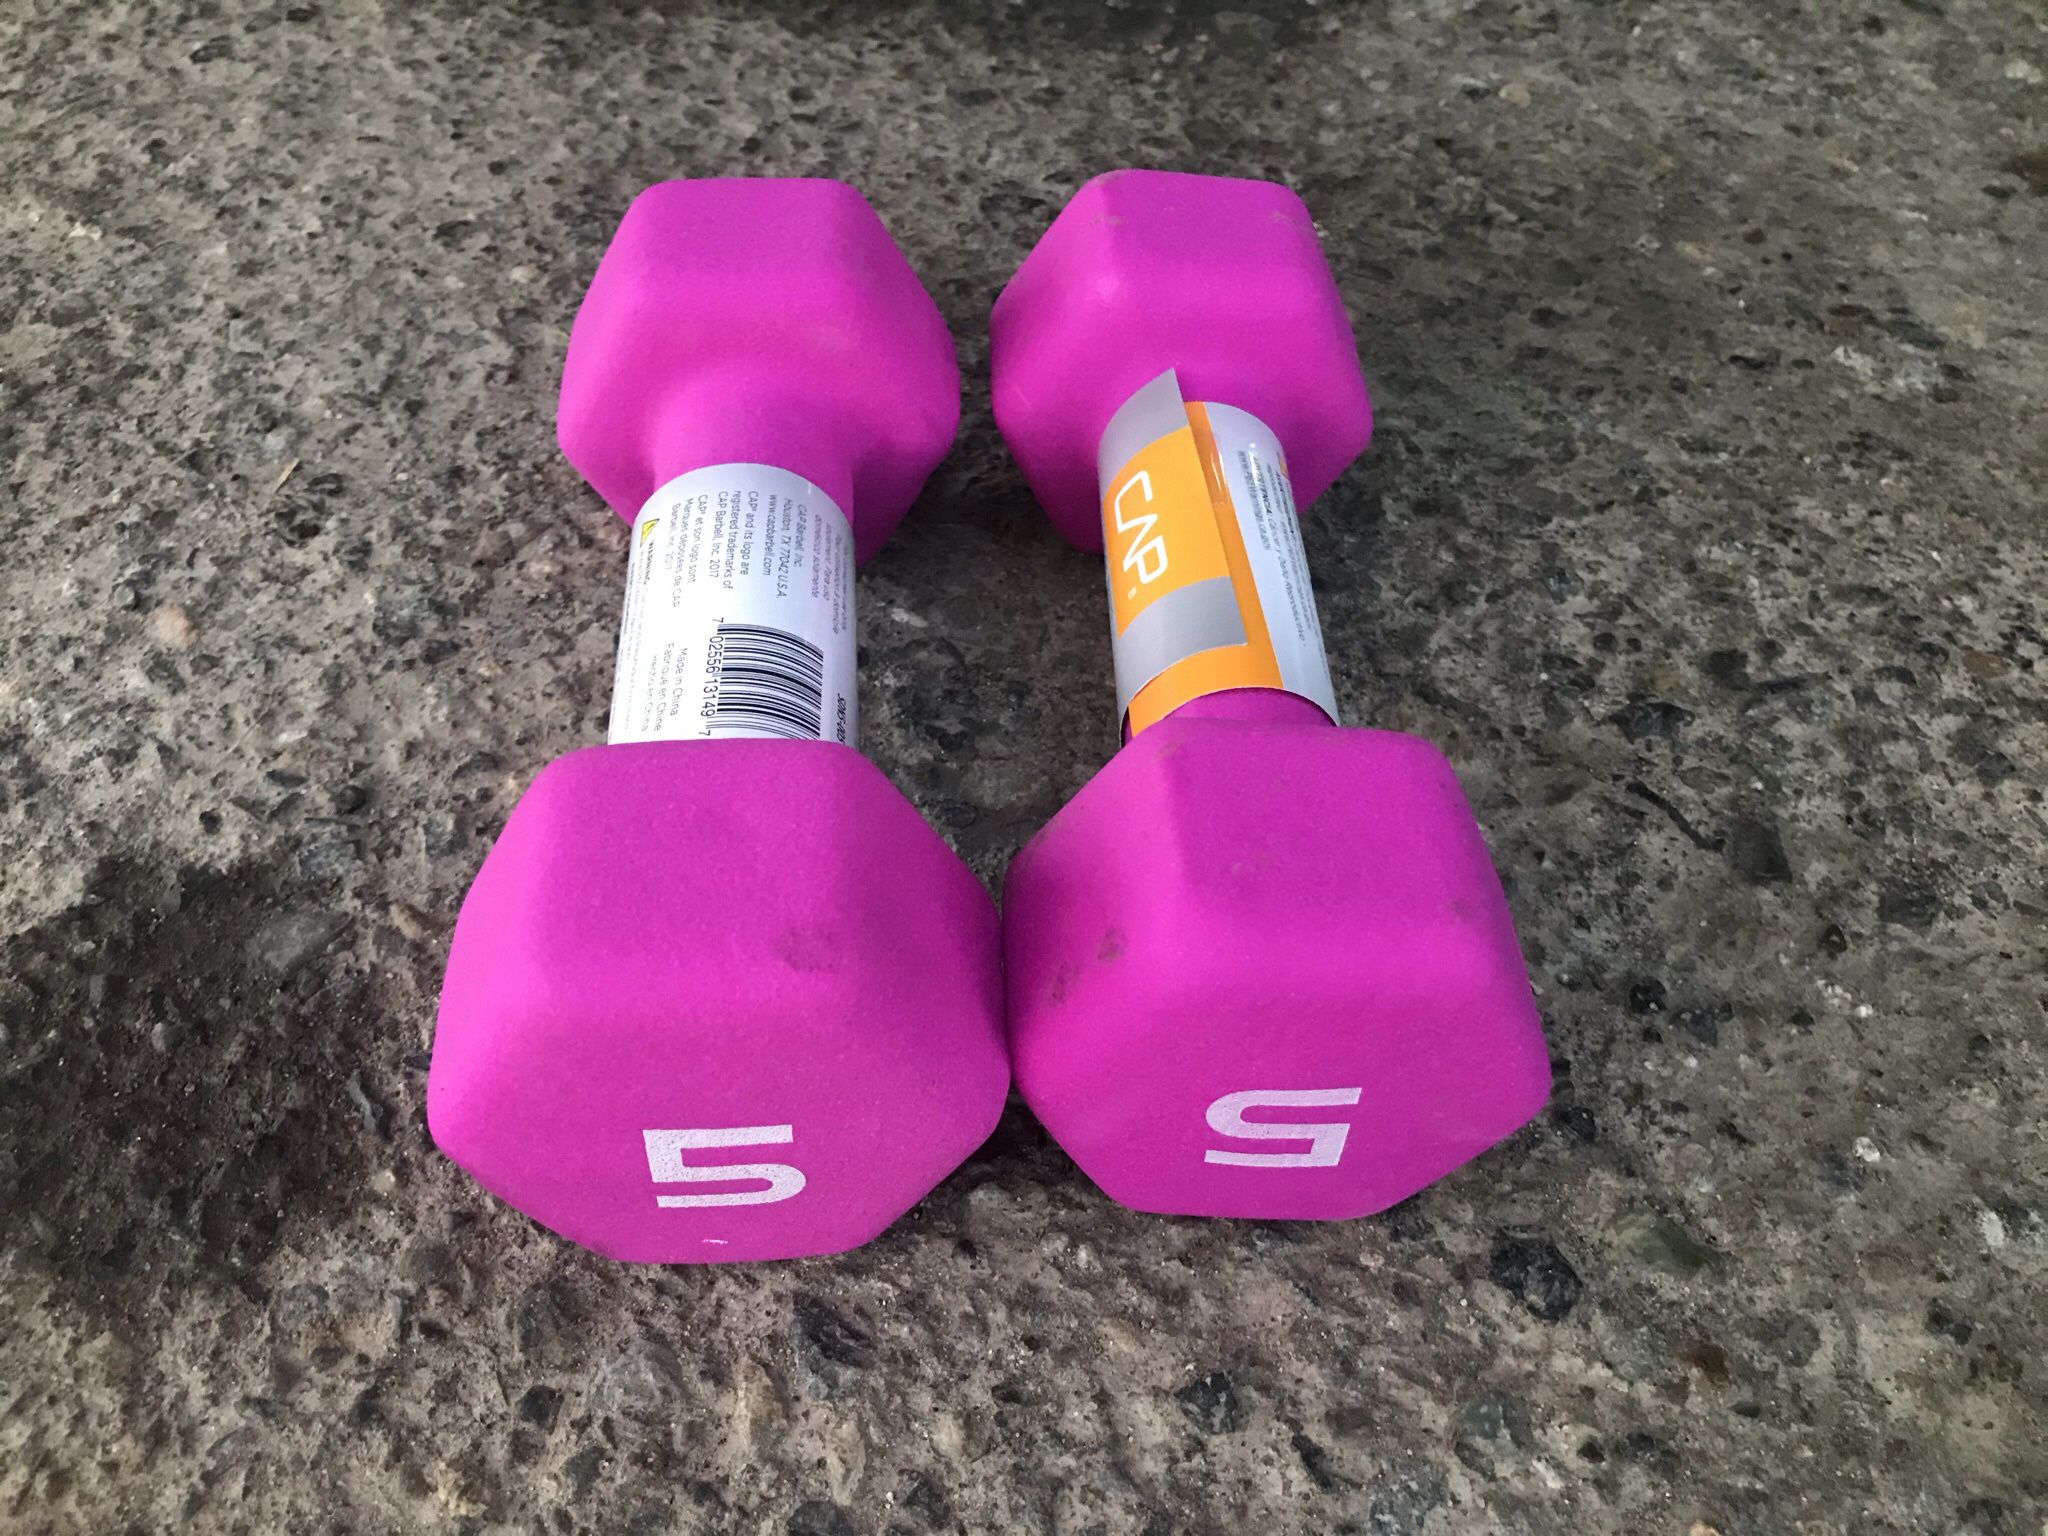 New In Box Pair Of 5lb Rubber Hex Dumbbells